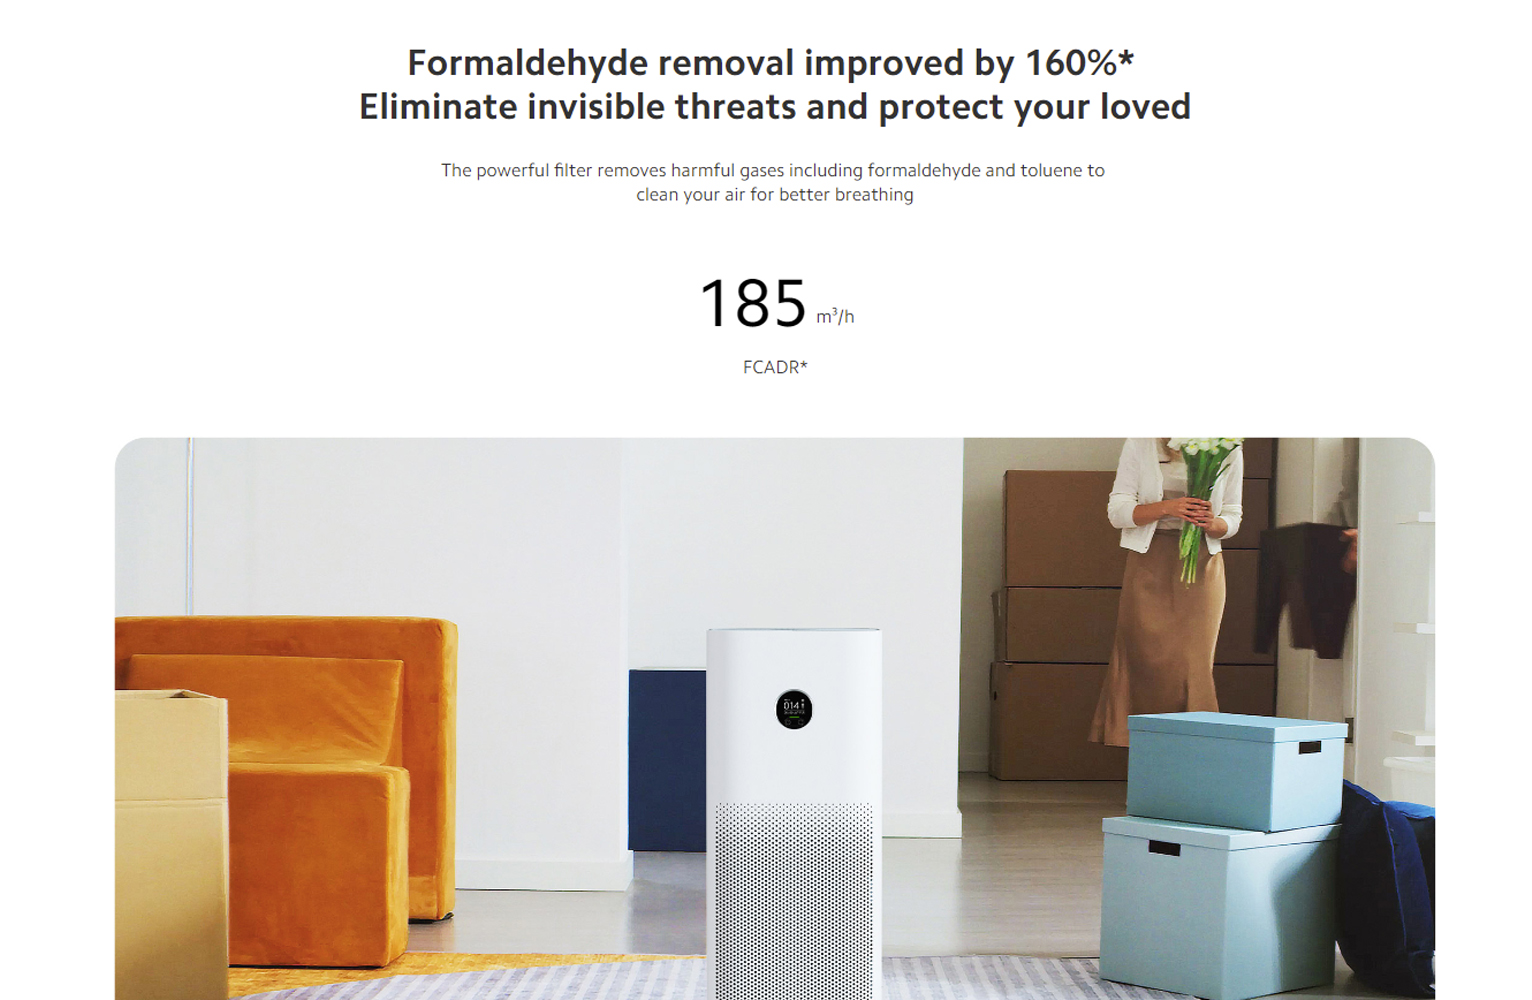 Xiaomi Smart Air Purifier 4 Pro Uk Appvoice Control Suitable For Large Room Cleaner Global Version 500 M3H Pm Cadr Oled Touch 8 Xiaomi &Lt;Table Class=&Quot;A-Normal A-Spacing-Micro&Quot;&Gt; &Lt;Tbody&Gt; &Lt;Tr Class=&Quot;A-Spacing-Small Po-Color&Quot;&Gt; &Lt;Td Class=&Quot;A-Span3&Quot;&Gt;&Lt;Span Class=&Quot;A-Size-Base A-Text-Bold&Quot;&Gt;Colour&Lt;/Span&Gt;&Lt;/Td&Gt; &Lt;Td Class=&Quot;A-Span9&Quot;&Gt;&Lt;Span Class=&Quot;A-Size-Base Po-Break-Word&Quot;&Gt;White&Lt;/Span&Gt;&Lt;/Td&Gt; &Lt;/Tr&Gt; &Lt;Tr Class=&Quot;A-Spacing-Small Po-Brand&Quot;&Gt; &Lt;Td Class=&Quot;A-Span3&Quot;&Gt;&Lt;Span Class=&Quot;A-Size-Base A-Text-Bold&Quot;&Gt;Brand&Lt;/Span&Gt;&Lt;/Td&Gt; &Lt;Td Class=&Quot;A-Span9&Quot;&Gt;&Lt;Span Class=&Quot;A-Size-Base Po-Break-Word&Quot;&Gt;Xiaomi&Lt;/Span&Gt;&Lt;/Td&Gt; &Lt;/Tr&Gt; &Lt;Tr Class=&Quot;A-Spacing-Small Po-Item_Depth_Width_Height&Quot;&Gt; &Lt;Td Class=&Quot;A-Span3&Quot;&Gt;&Lt;Span Class=&Quot;A-Size-Base A-Text-Bold&Quot;&Gt;Product Dimensions&Lt;/Span&Gt;&Lt;/Td&Gt; &Lt;Td Class=&Quot;A-Span9&Quot;&Gt;&Lt;Span Class=&Quot;A-Size-Base Po-Break-Word&Quot;&Gt;27.5D X 27.5W X 68H Centimeters&Lt;/Span&Gt;&Lt;/Td&Gt; &Lt;/Tr&Gt; &Lt;Tr Class=&Quot;A-Spacing-Small Po-Power_Source_Type&Quot;&Gt; &Lt;Td Class=&Quot;A-Span3&Quot;&Gt;&Lt;Span Class=&Quot;A-Size-Base A-Text-Bold&Quot;&Gt;Power Source&Lt;/Span&Gt;&Lt;/Td&Gt; &Lt;Td Class=&Quot;A-Span9&Quot;&Gt;&Lt;Span Class=&Quot;A-Size-Base Po-Break-Word&Quot;&Gt;Corded Electric&Lt;/Span&Gt;&Lt;/Td&Gt; &Lt;/Tr&Gt; &Lt;Tr Class=&Quot;A-Spacing-Small Po-Item_Weight&Quot;&Gt; &Lt;Td Class=&Quot;A-Span3&Quot;&Gt;&Lt;Span Class=&Quot;A-Size-Base A-Text-Bold&Quot;&Gt;Item Weight&Lt;/Span&Gt;&Lt;/Td&Gt; &Lt;Td Class=&Quot;A-Span9&Quot;&Gt;&Lt;Span Class=&Quot;A-Size-Base Po-Break-Word&Quot;&Gt;6.8 Kilograms&Lt;/Span&Gt;&Lt;/Td&Gt; &Lt;/Tr&Gt; &Lt;/Tbody&Gt; &Lt;/Table&Gt; &Lt;H5&Gt;We Also Provide International Wholesale And Retail Shipping To All Gcc Countries: Saudi Arabia, Qatar, Oman, Kuwait, Bahrain.&Lt;/H5&Gt; Xiaomi Xiaomi Smart Air Purifier 4 Pro